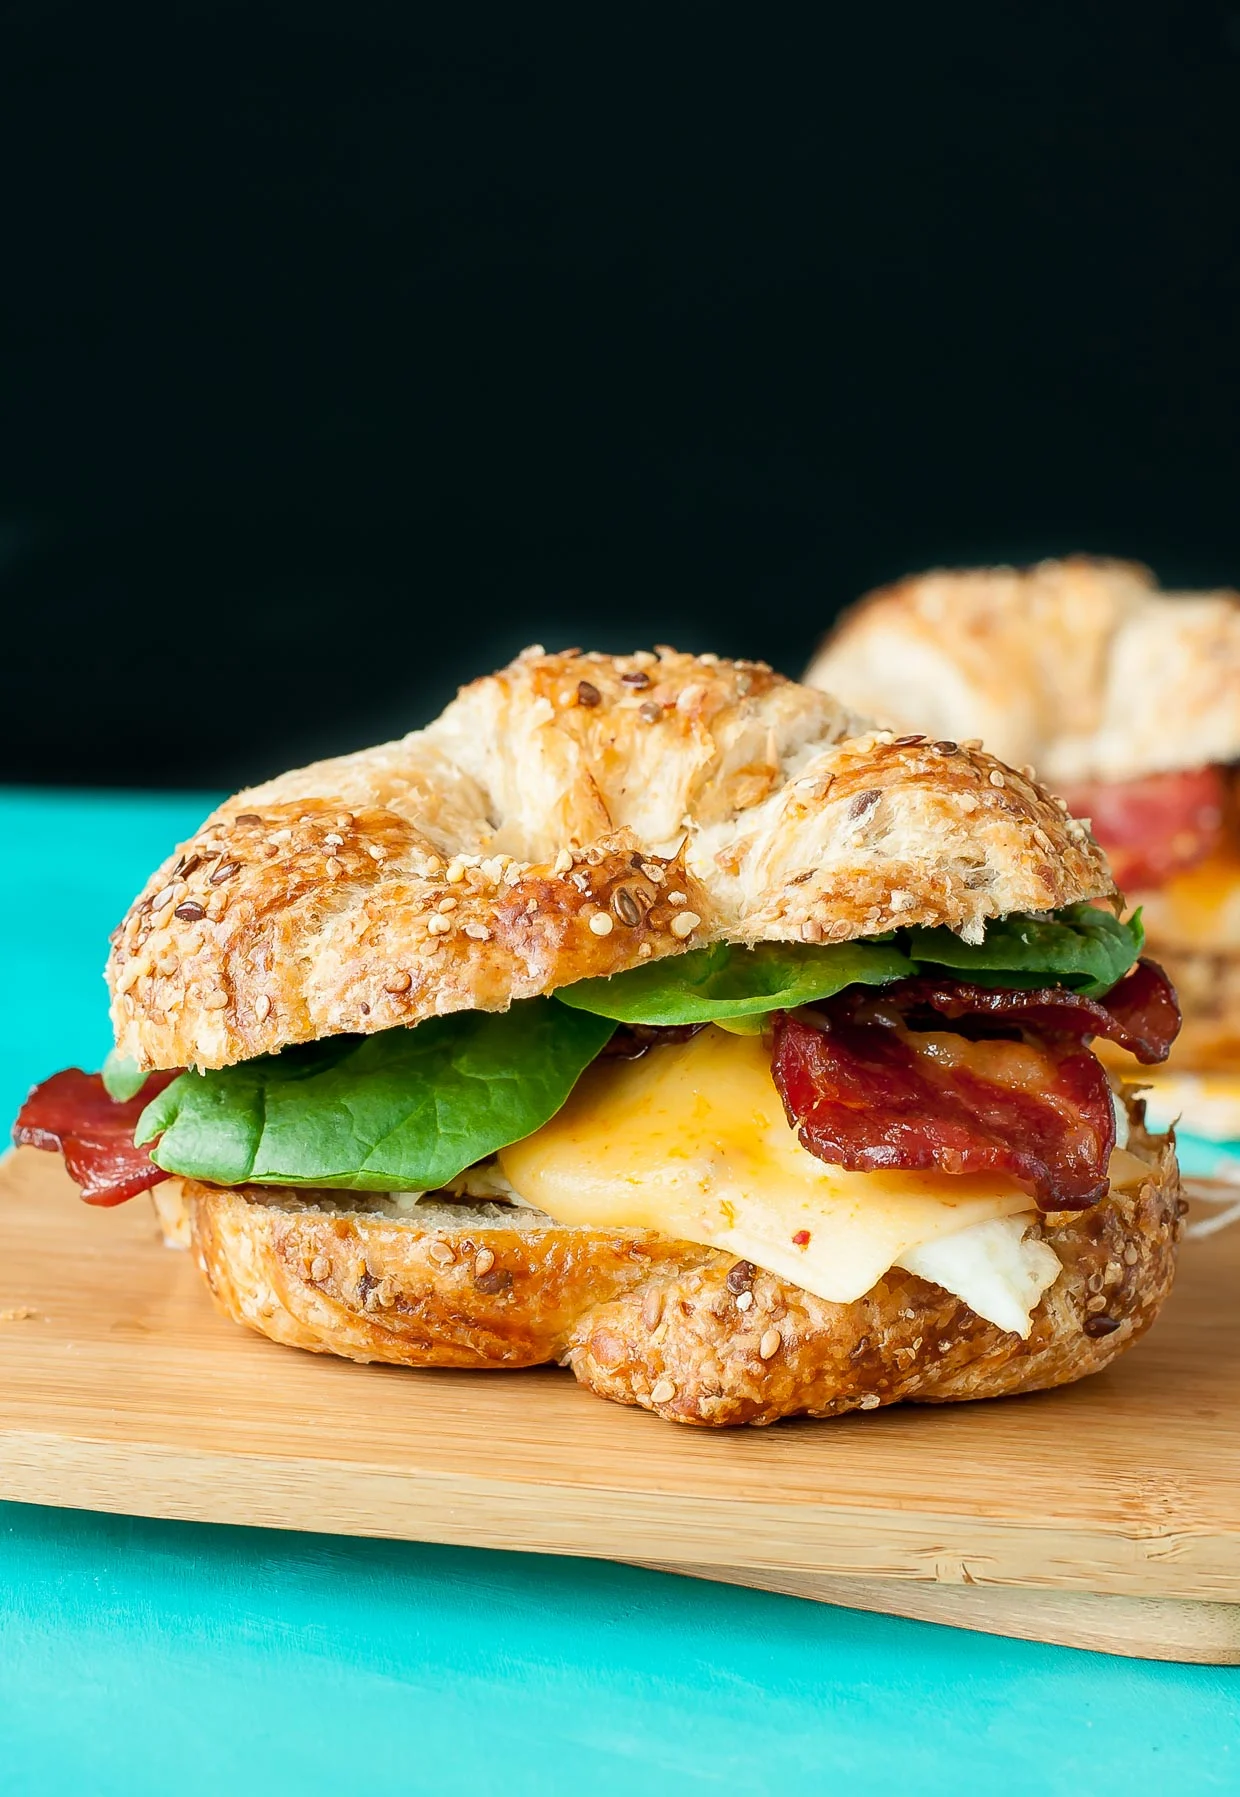 Croissant breakfast sandwich with egg, lettuce and bacon placed on a wooden chopping board.